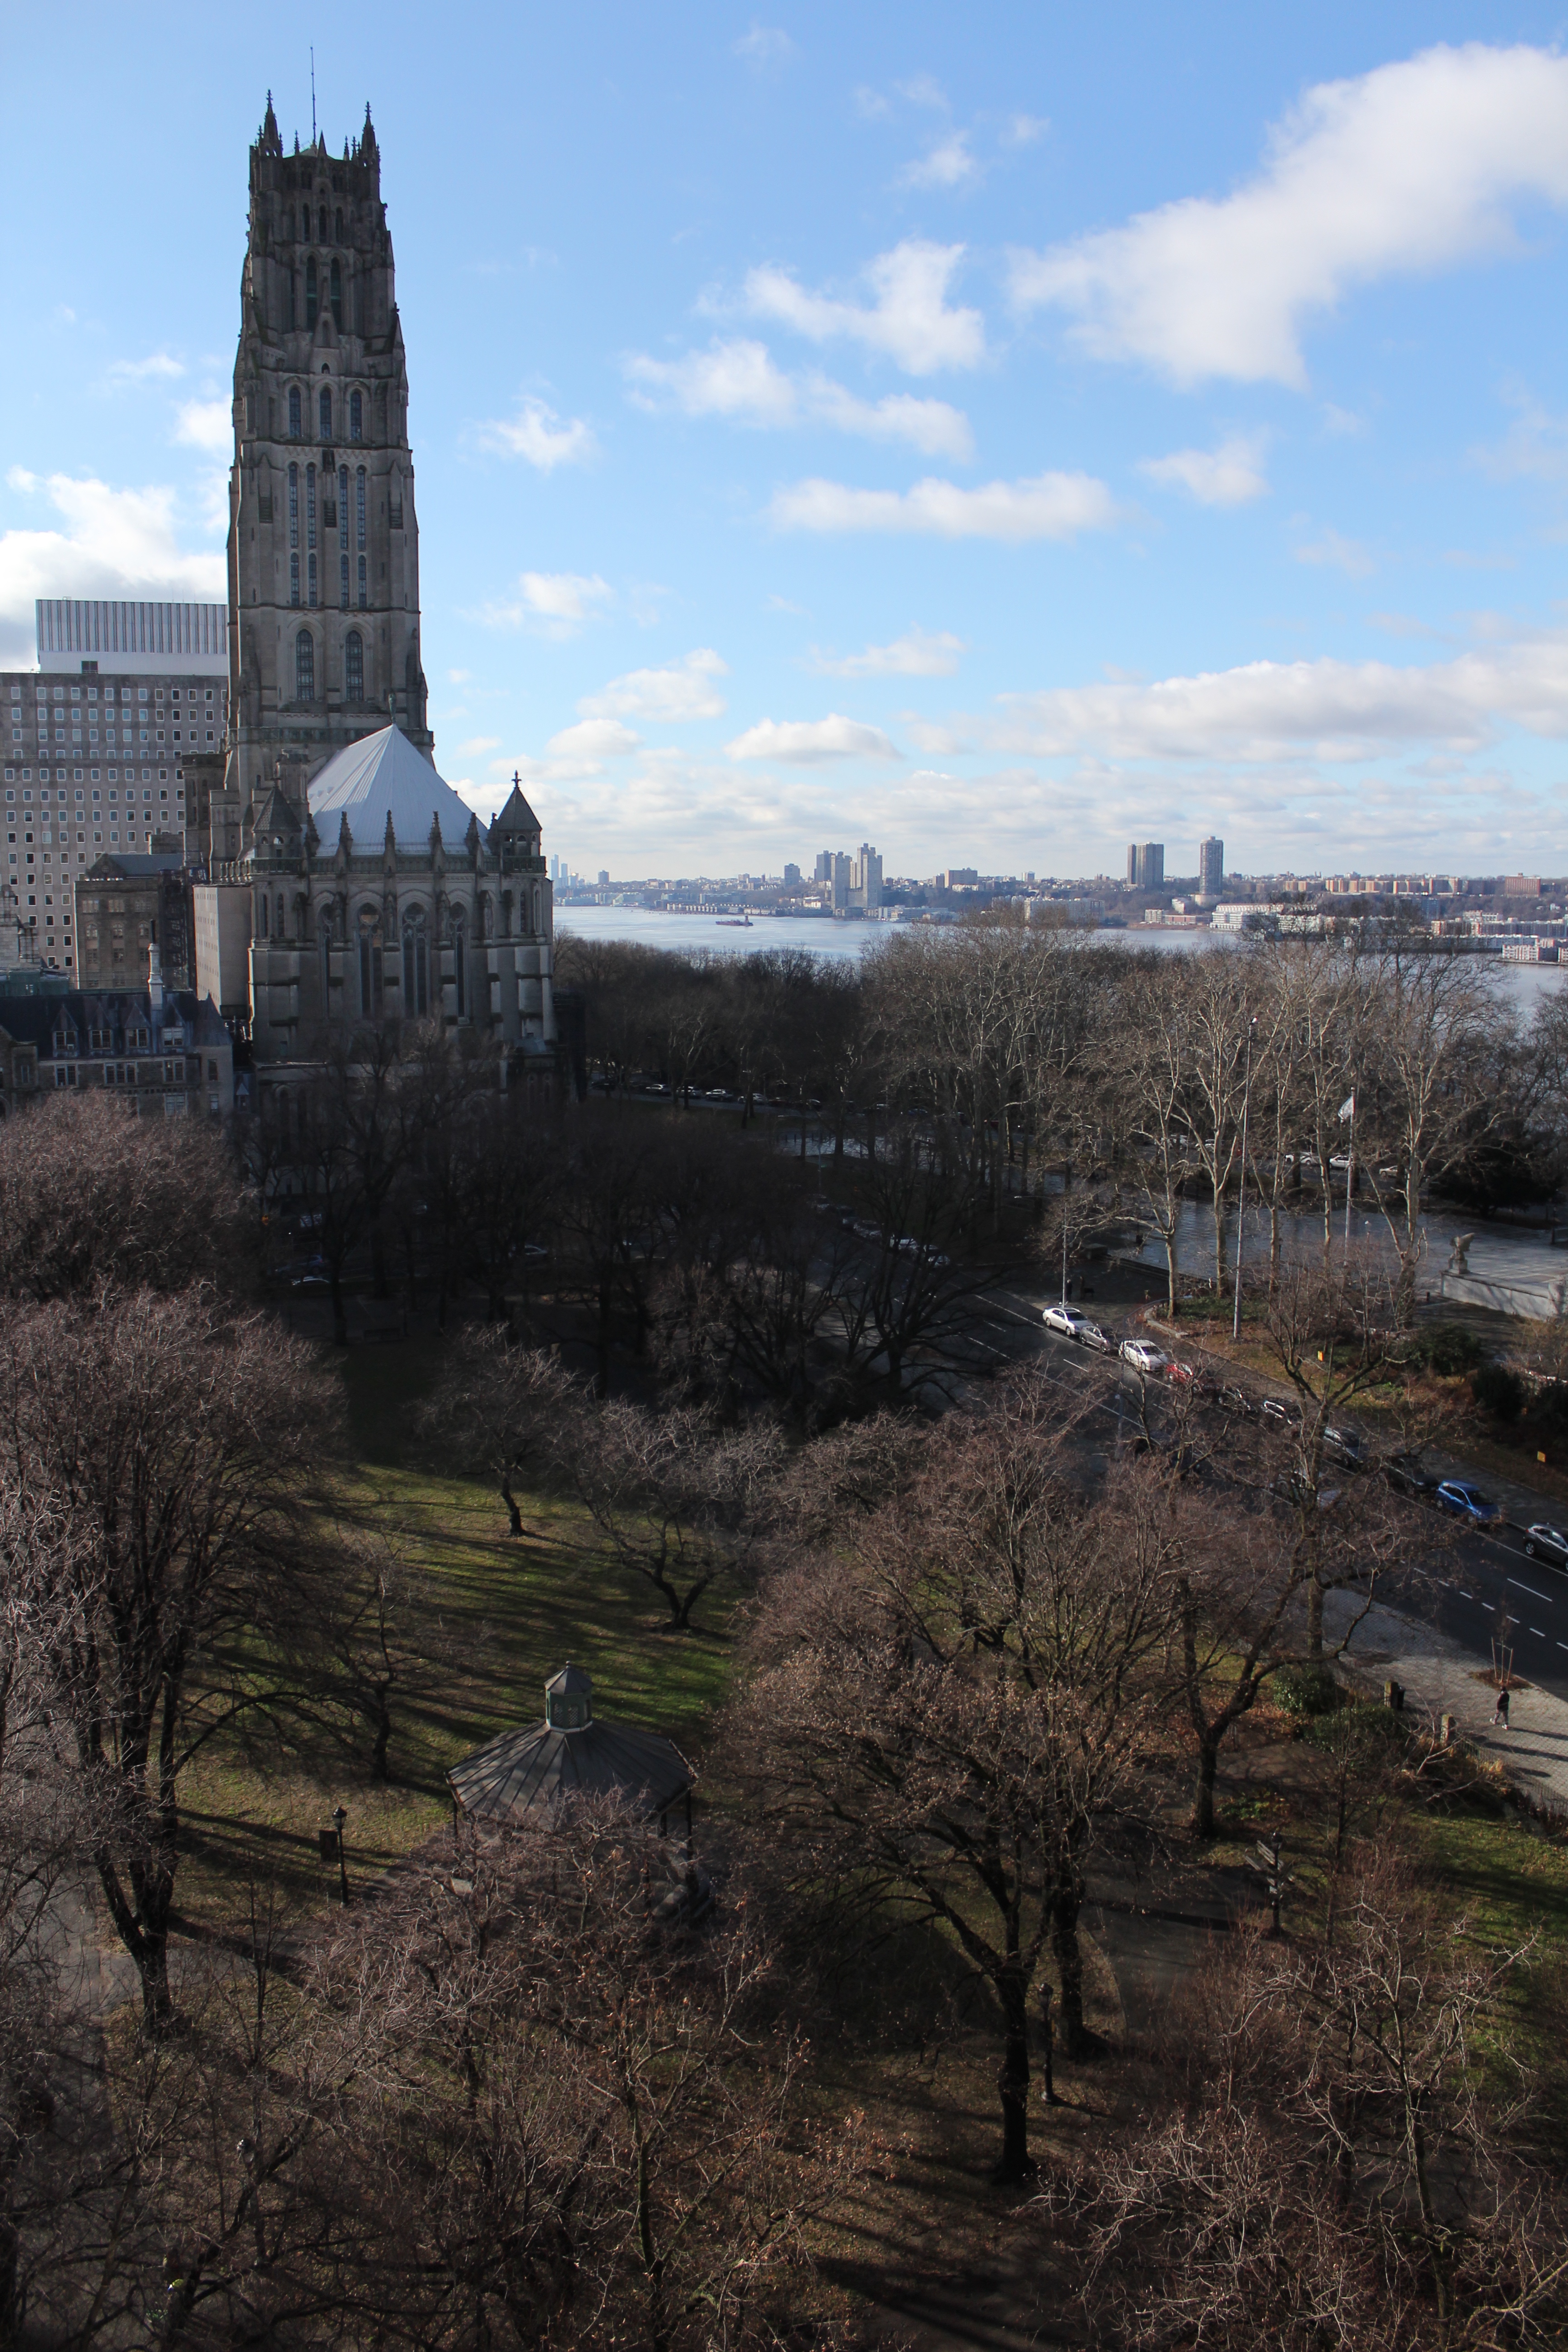 A view of a church and a park with barren trees with a river in the backdrop.